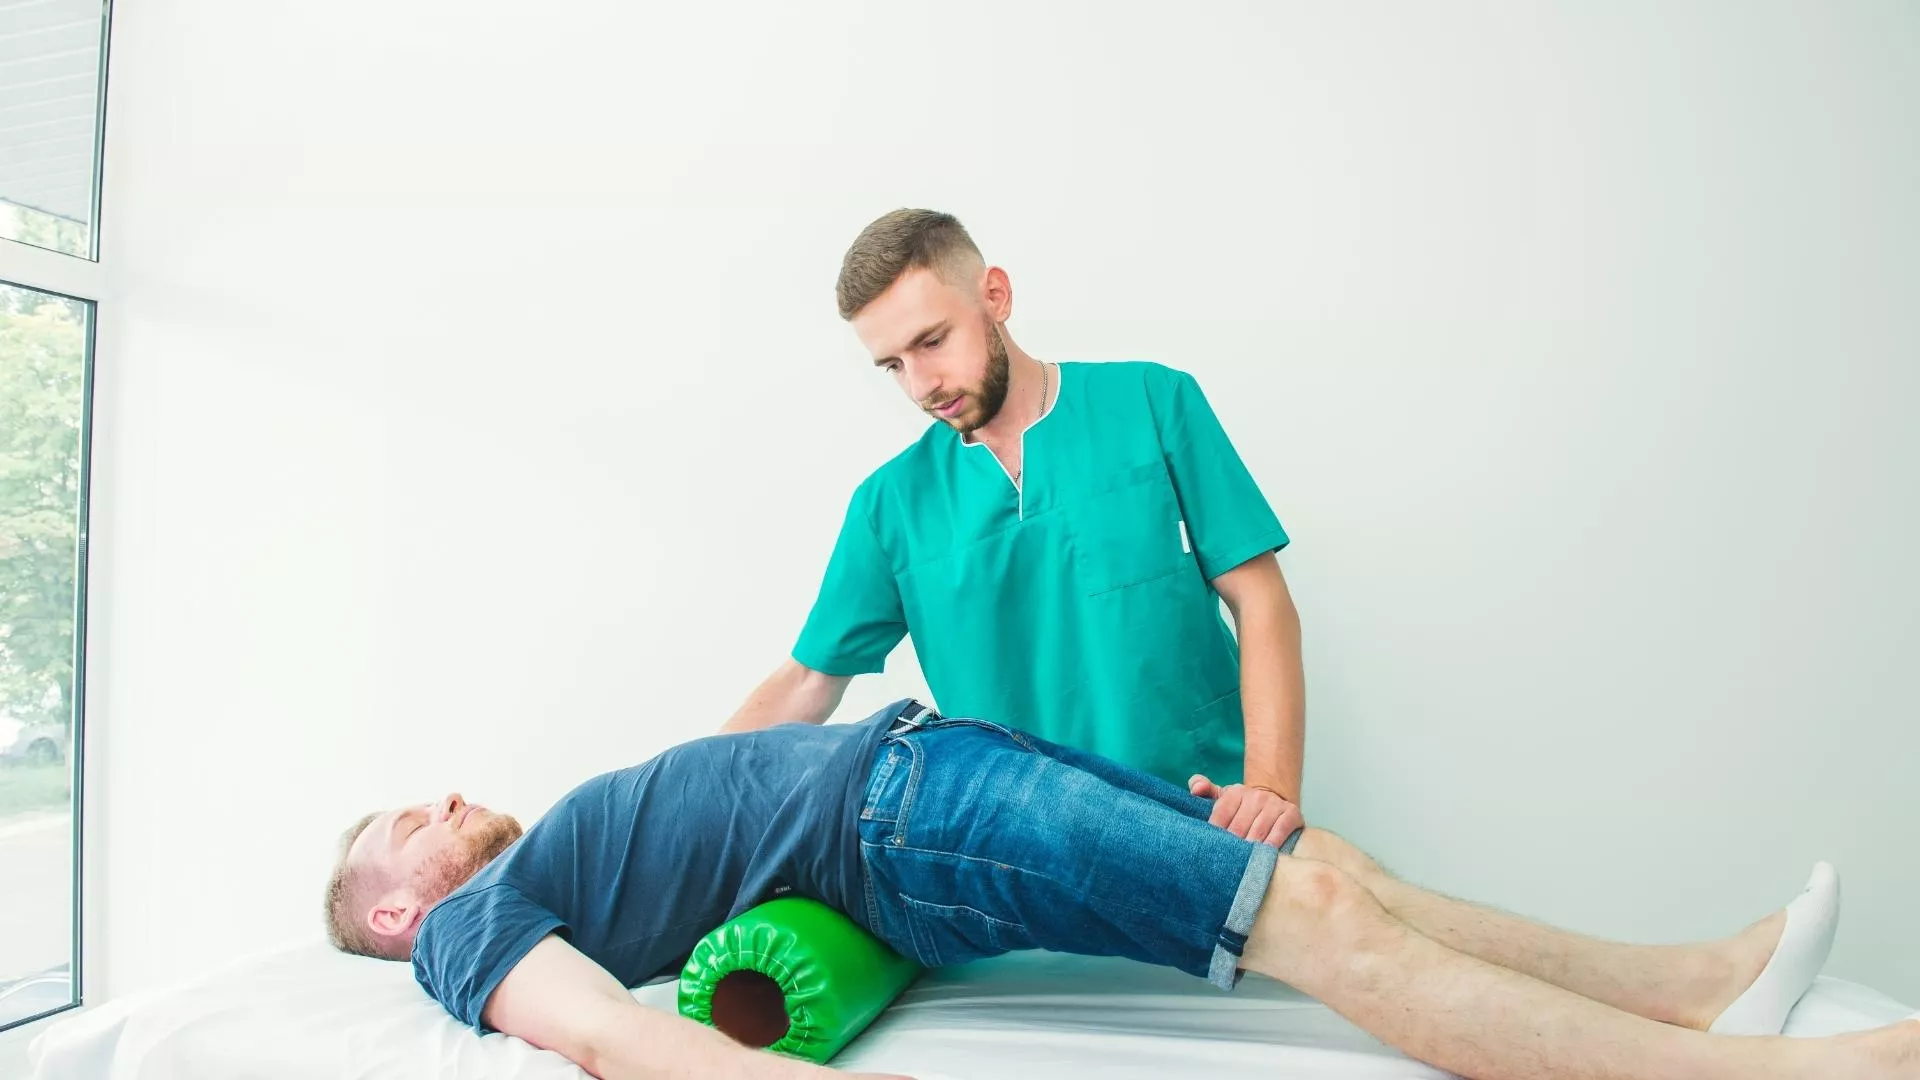 What Should Be Considered After Physical Therapy?